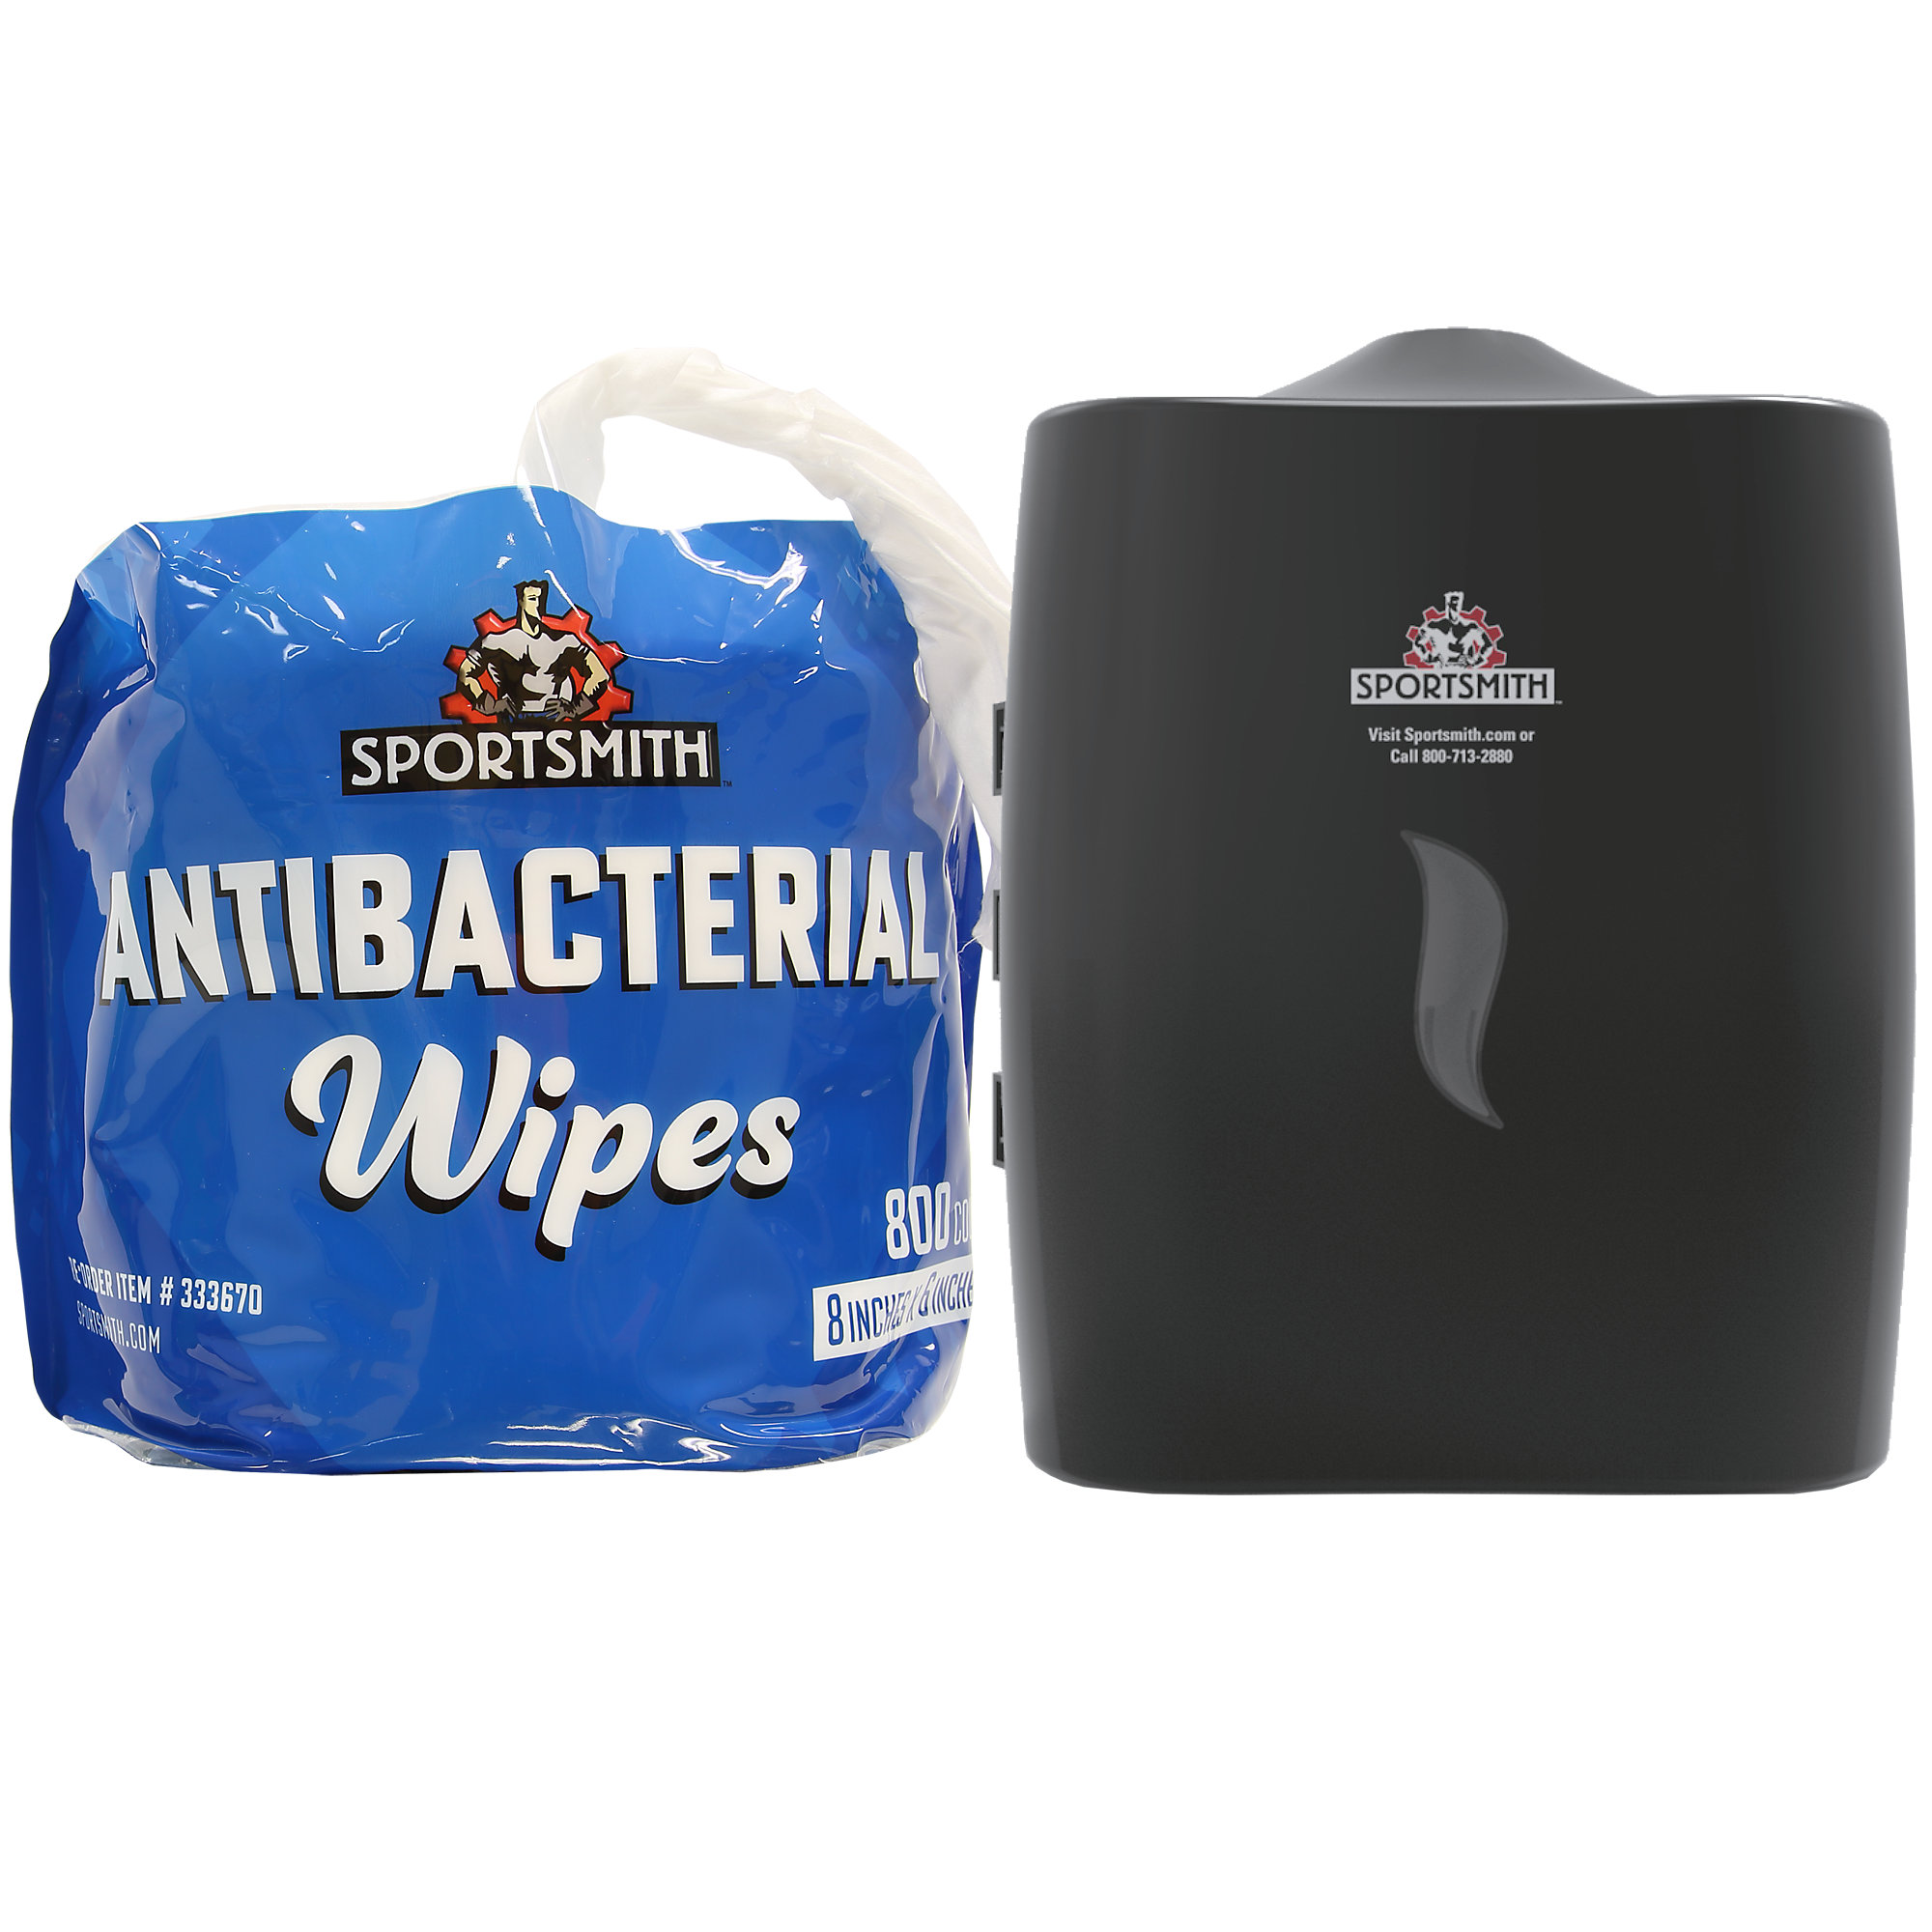 Wall-Mounted Gym Sanitation Kit - FDA Approved 800 Count Gym Wipes